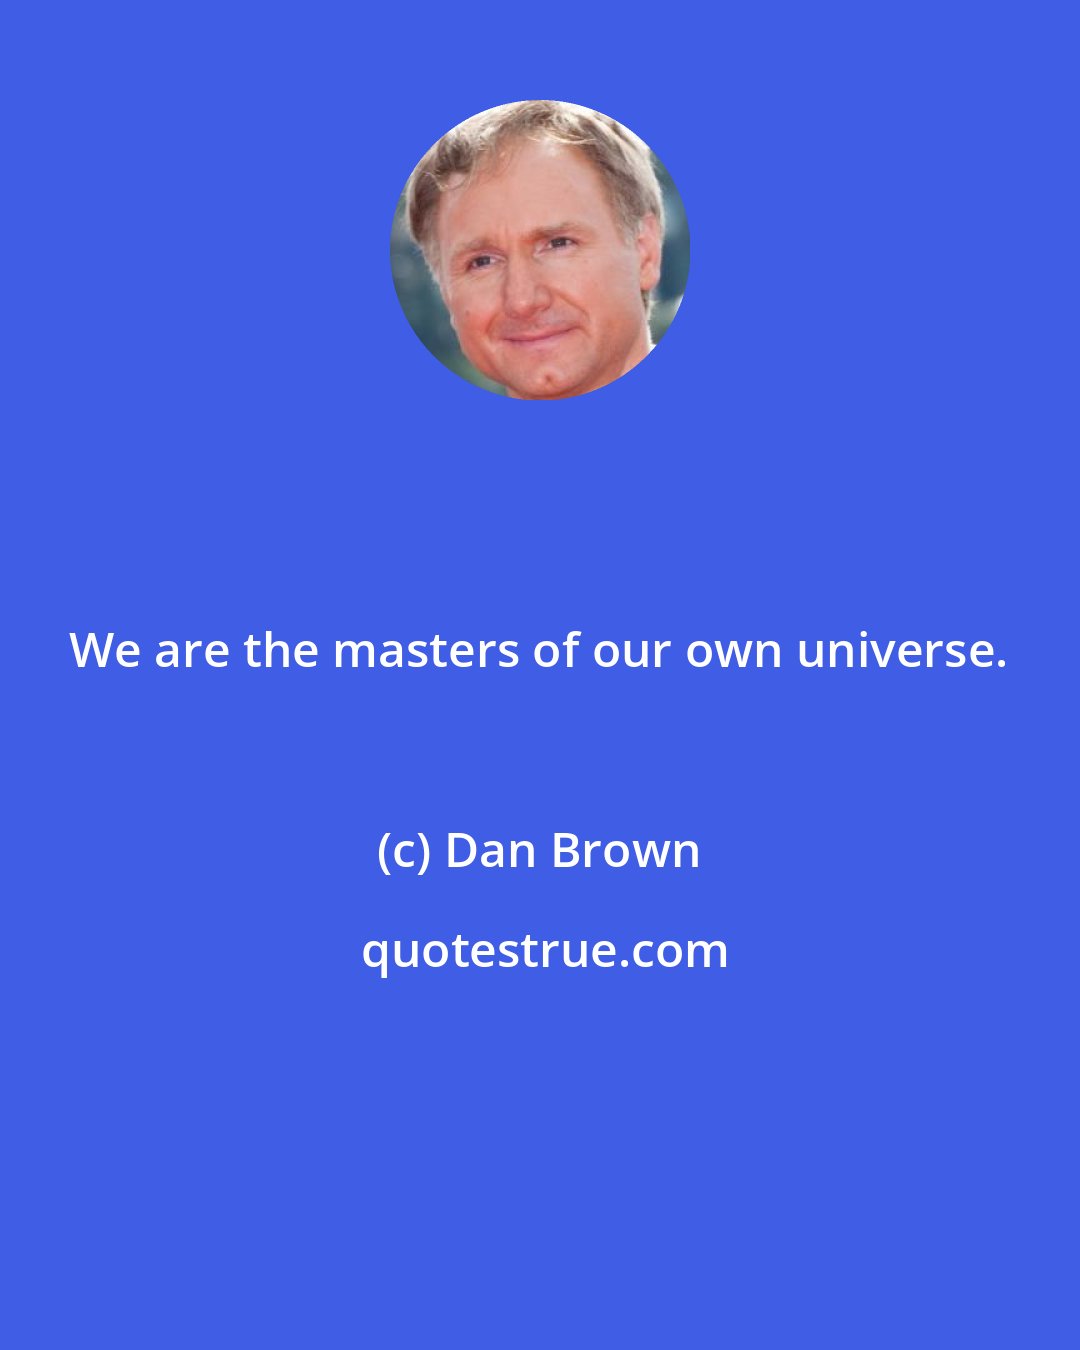 Dan Brown: We are the masters of our own universe.